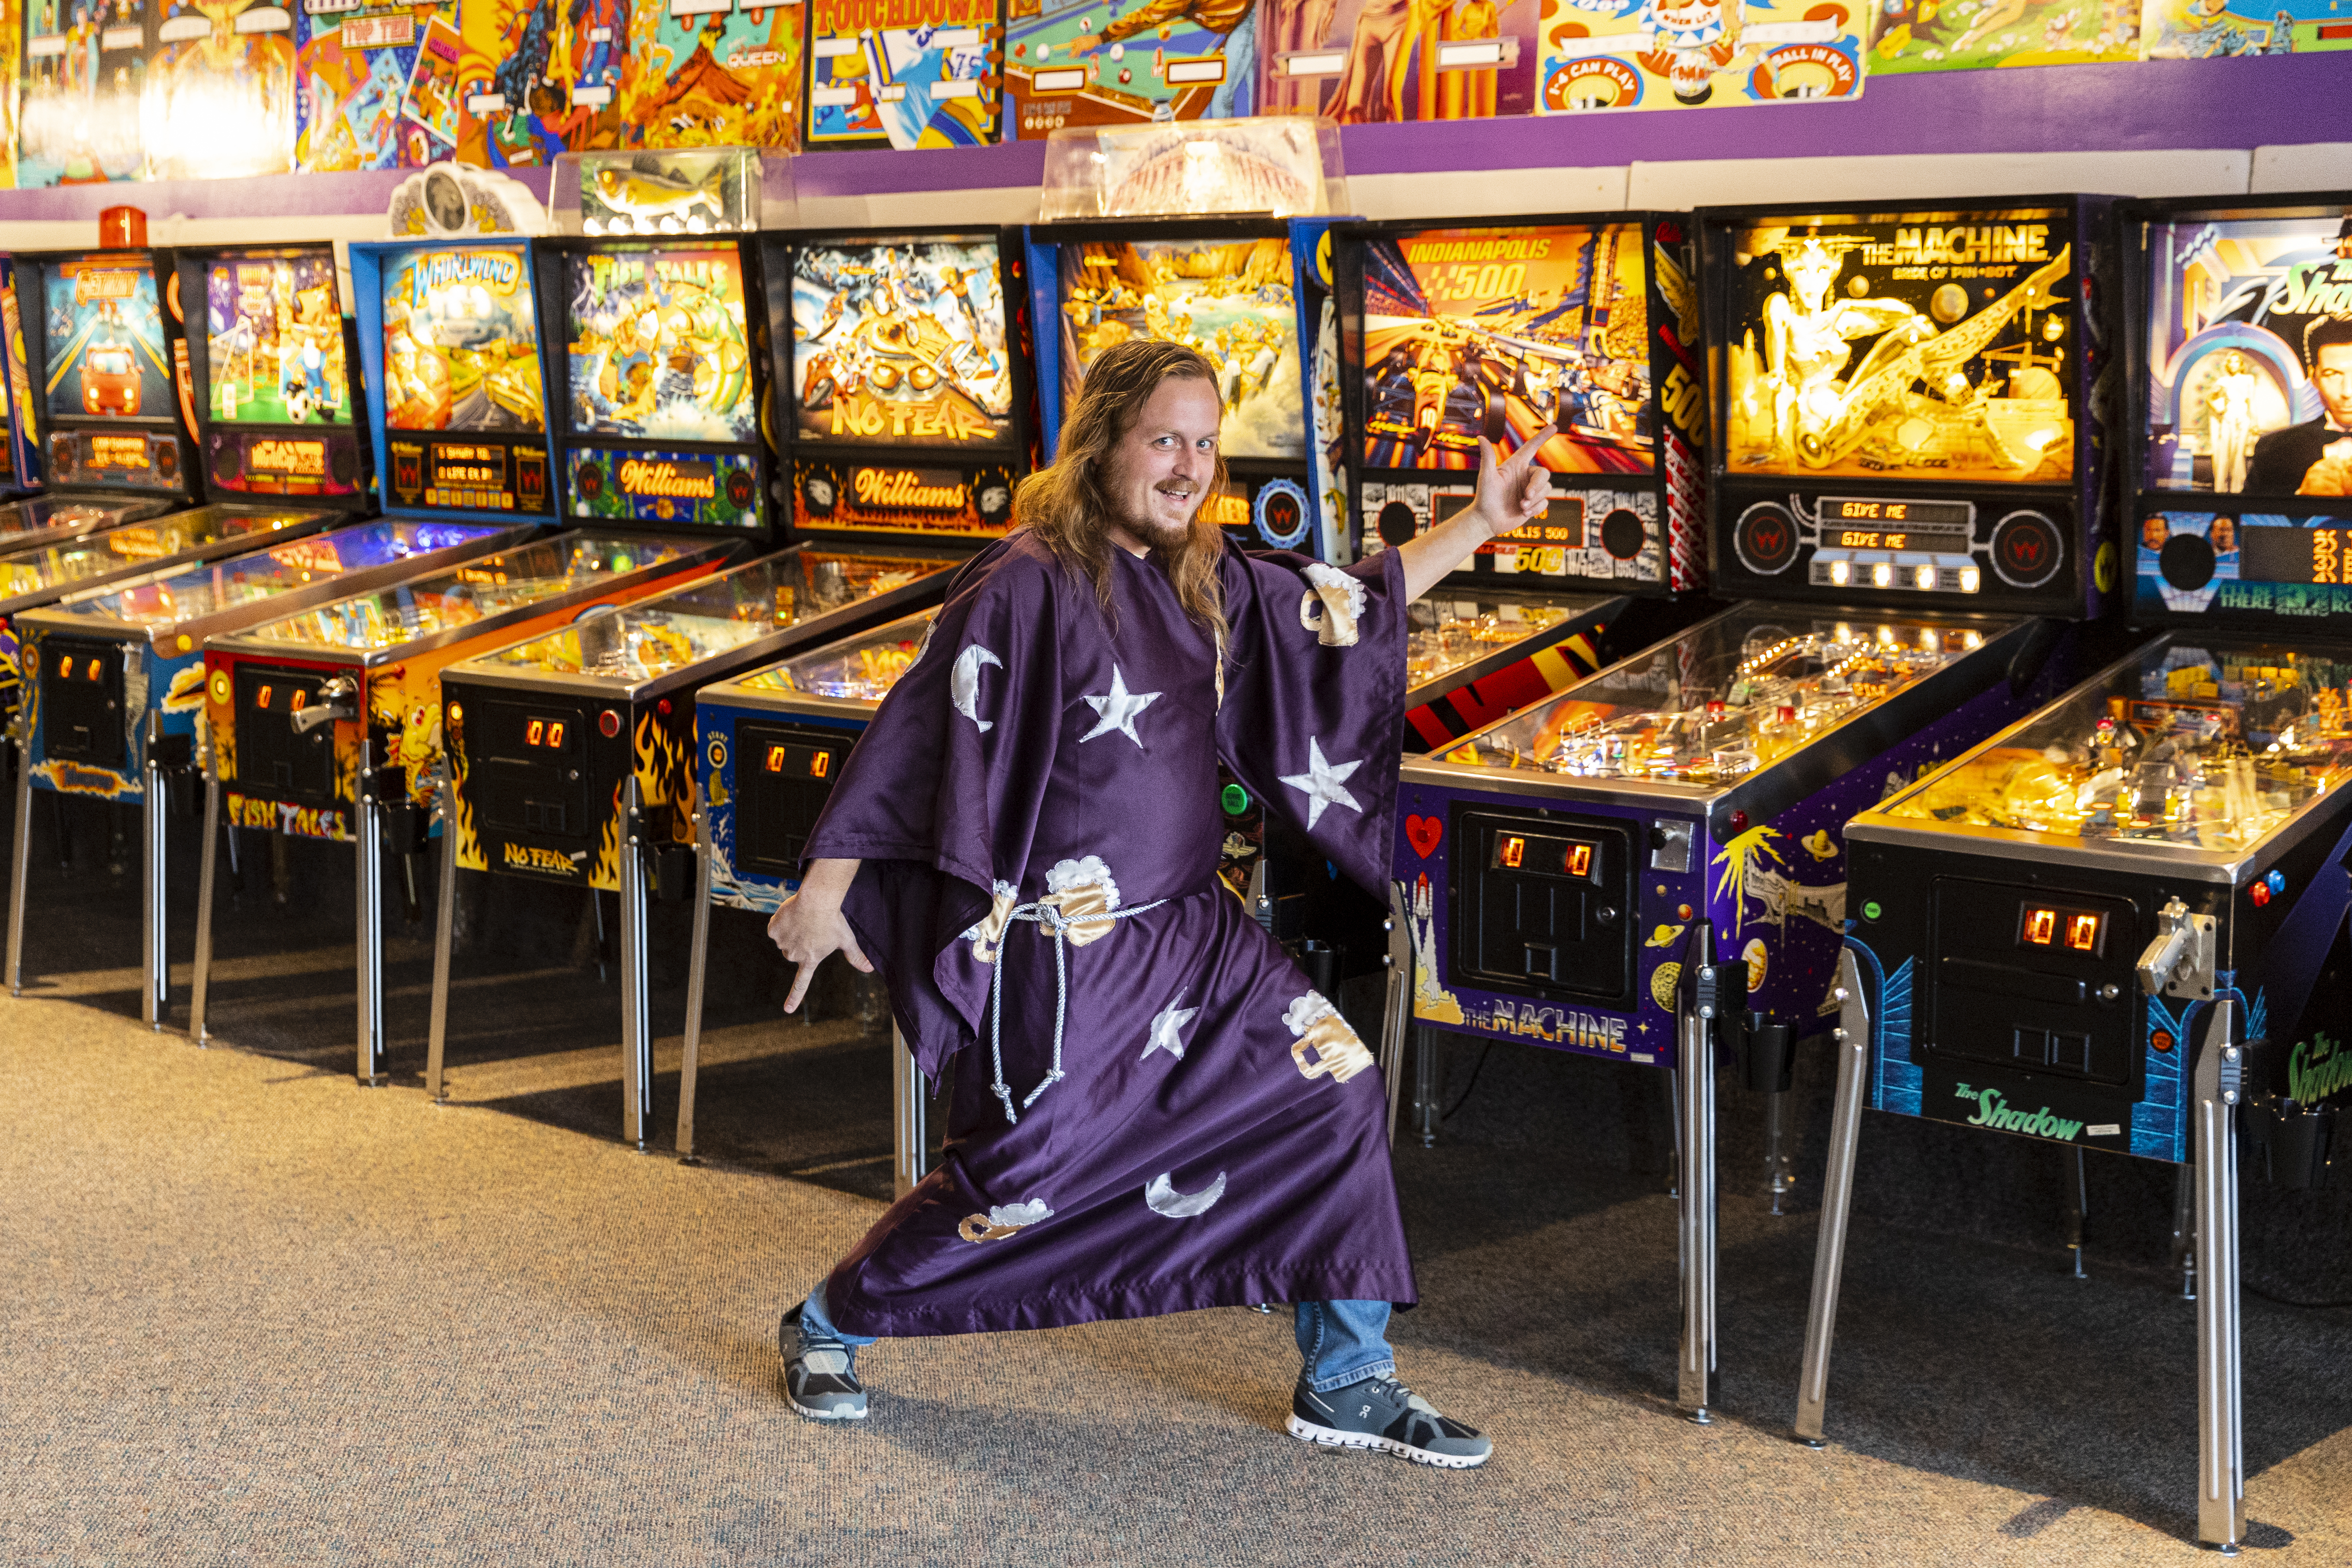 Project Pinball places first machine in Alabama—learn why it matters